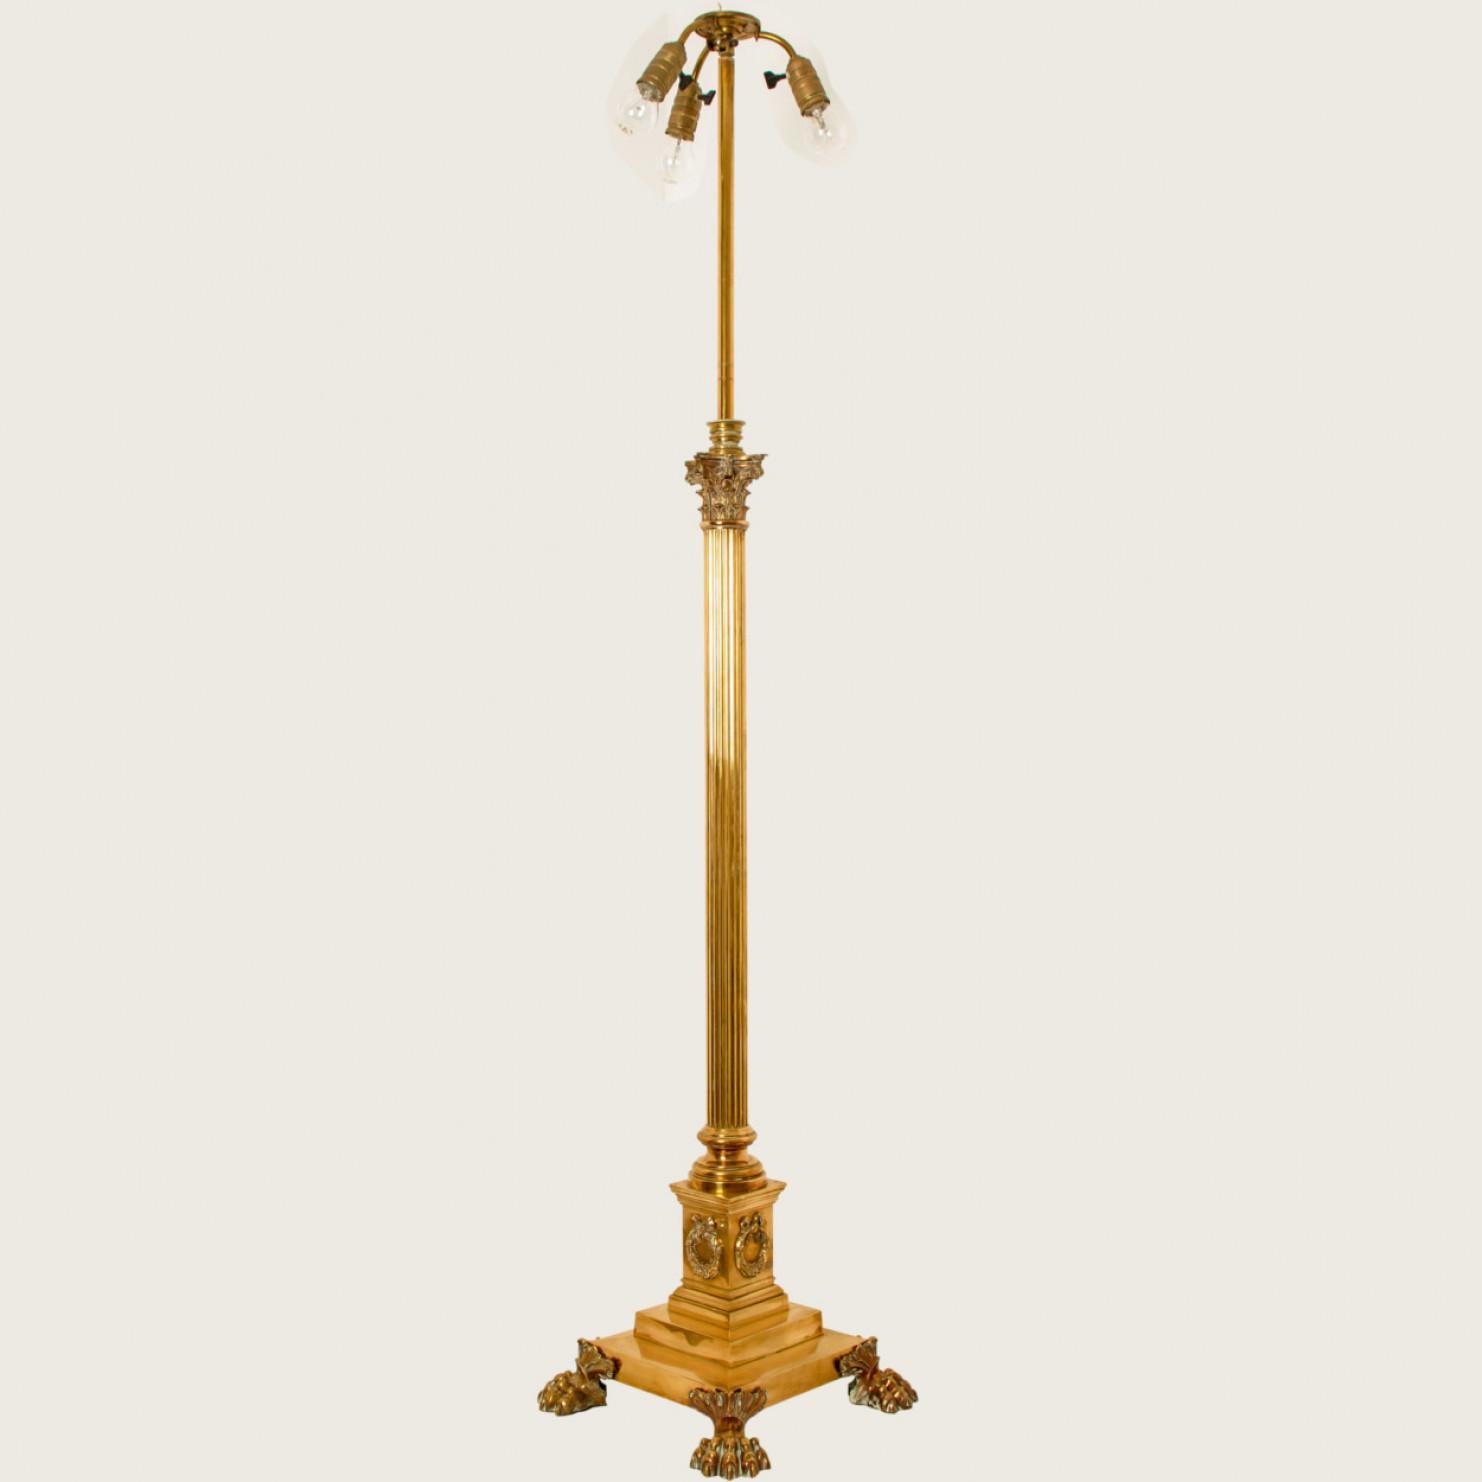 Other Antique Corinthian Column Brass Floor Lamp with Fringed Lampshade, England, 1890 For Sale